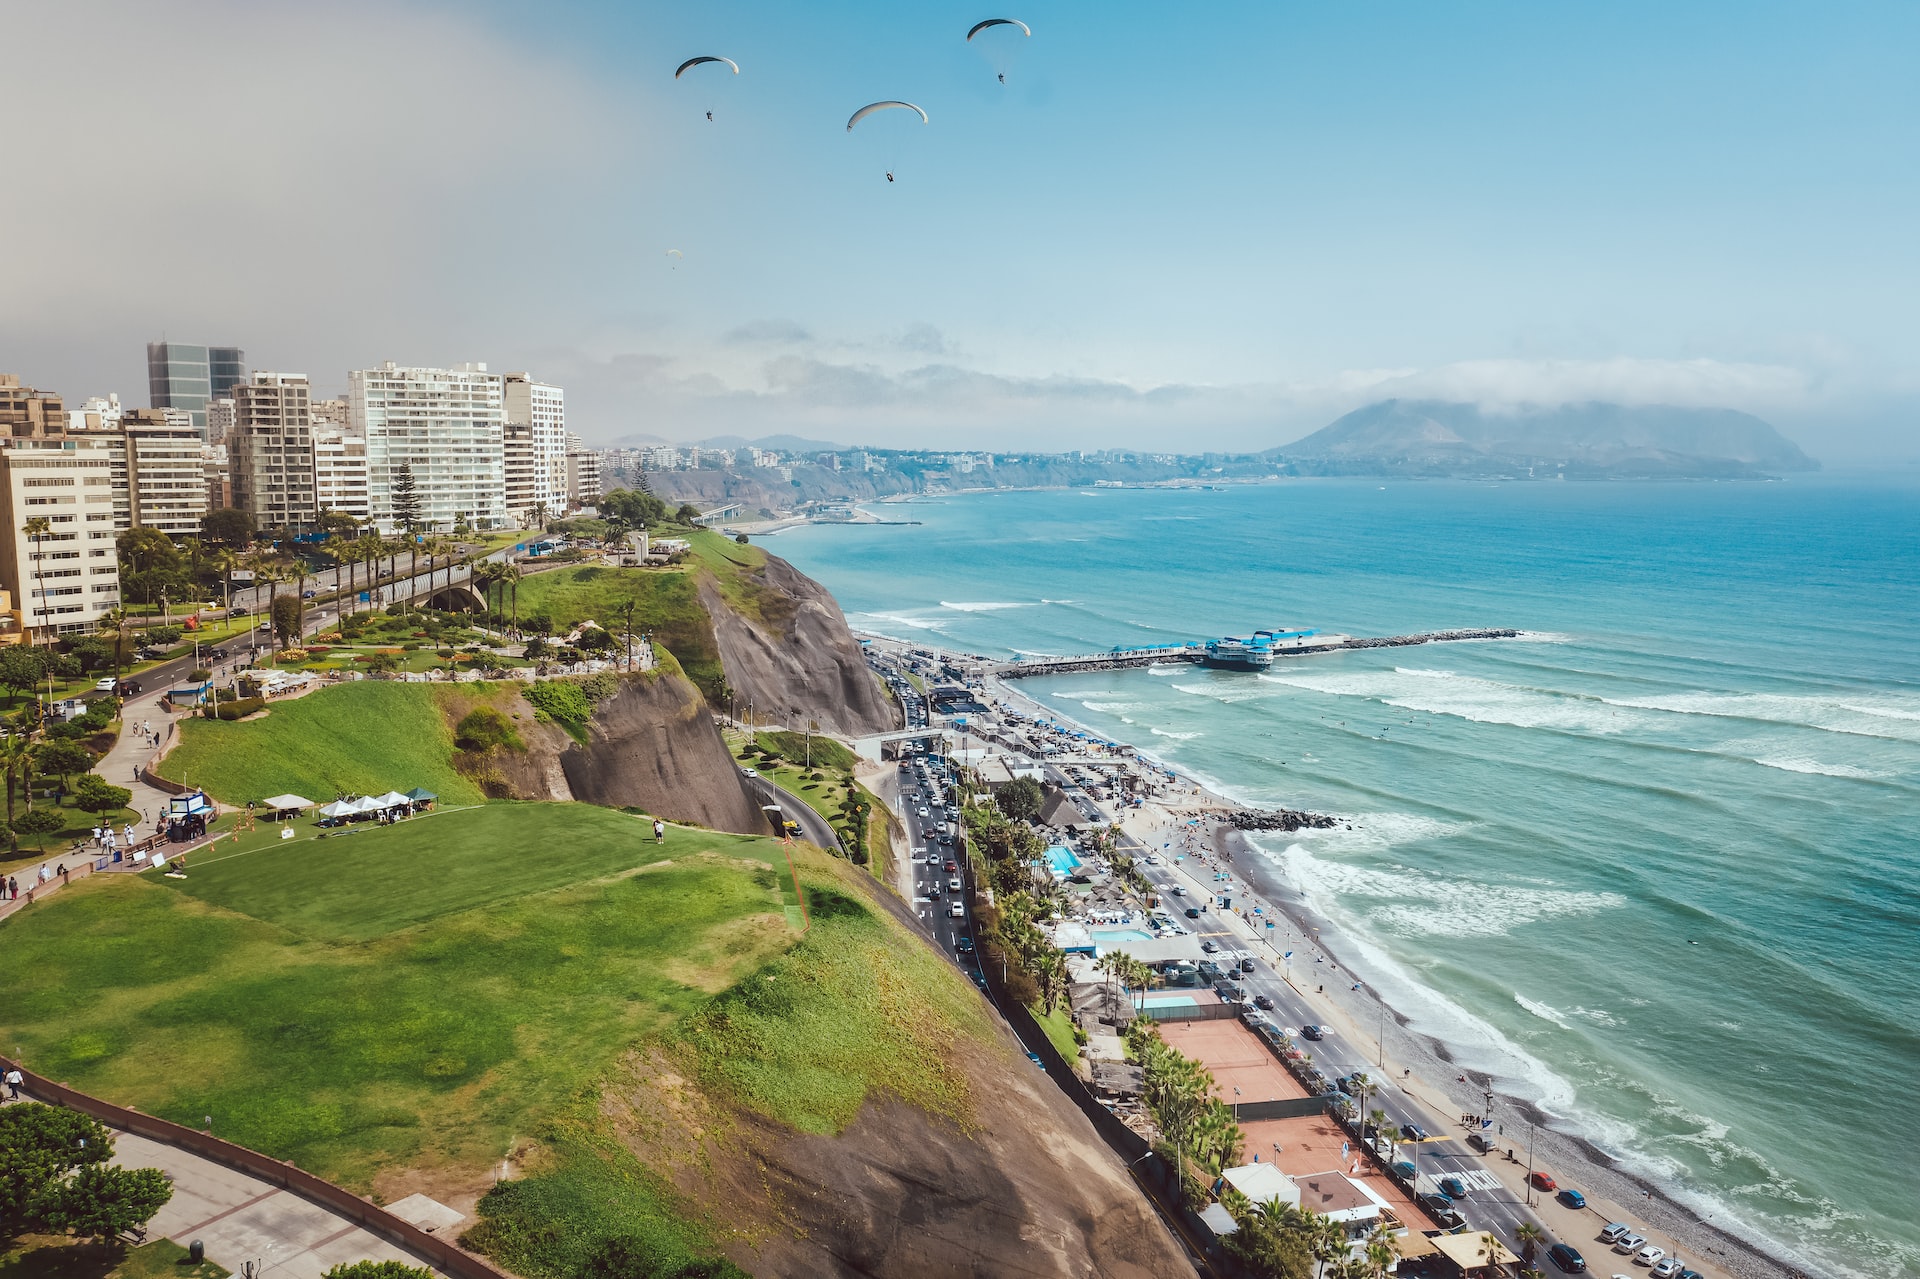 Top 7 Tourist Attractions in Lima, Peru